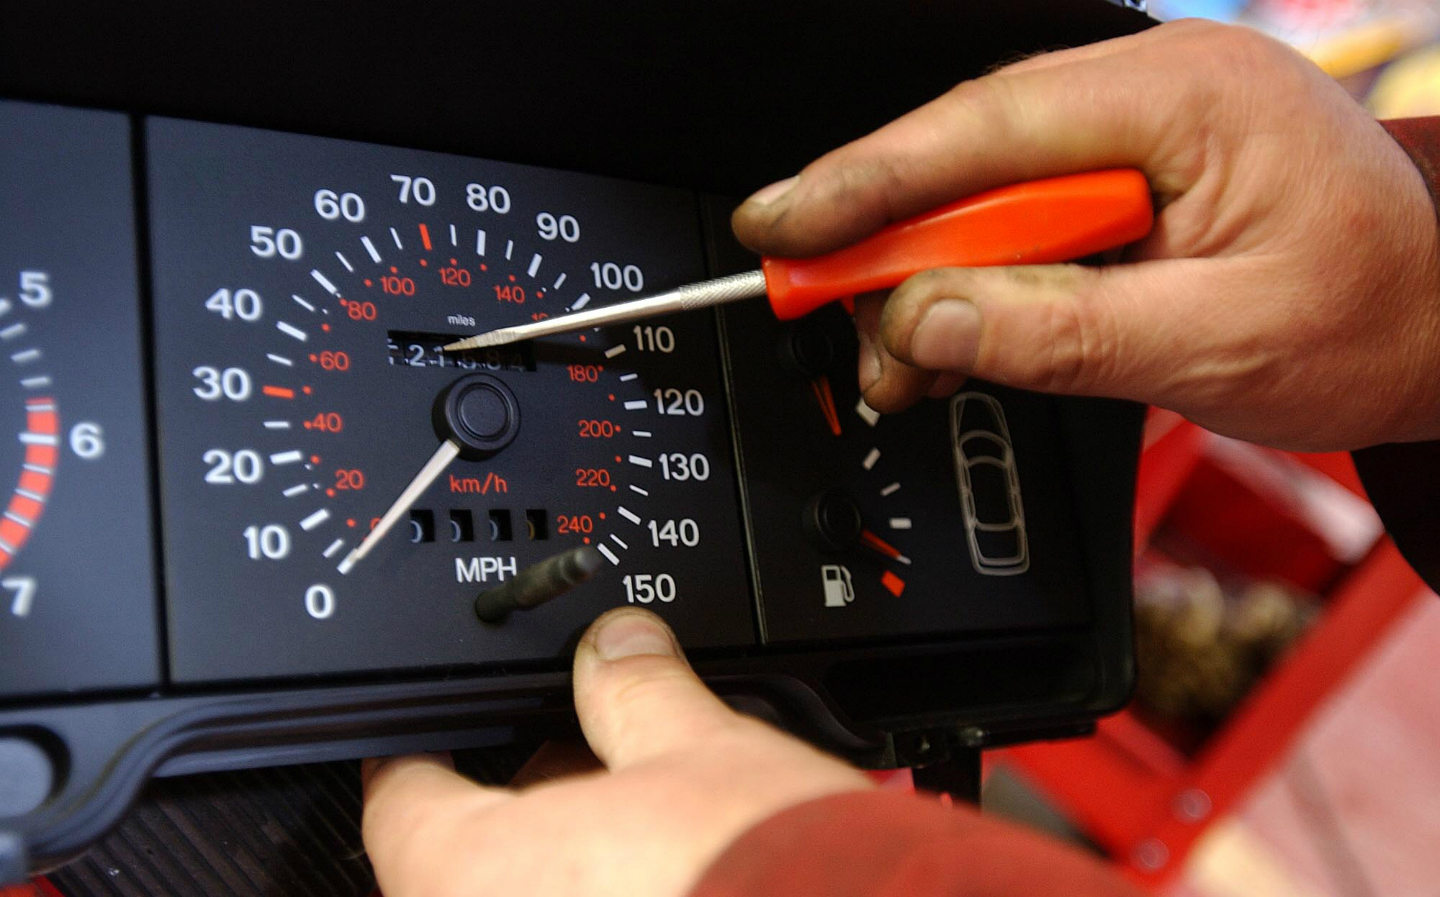 2.5m cars with clocked mileages could be on UK roads, study suggests